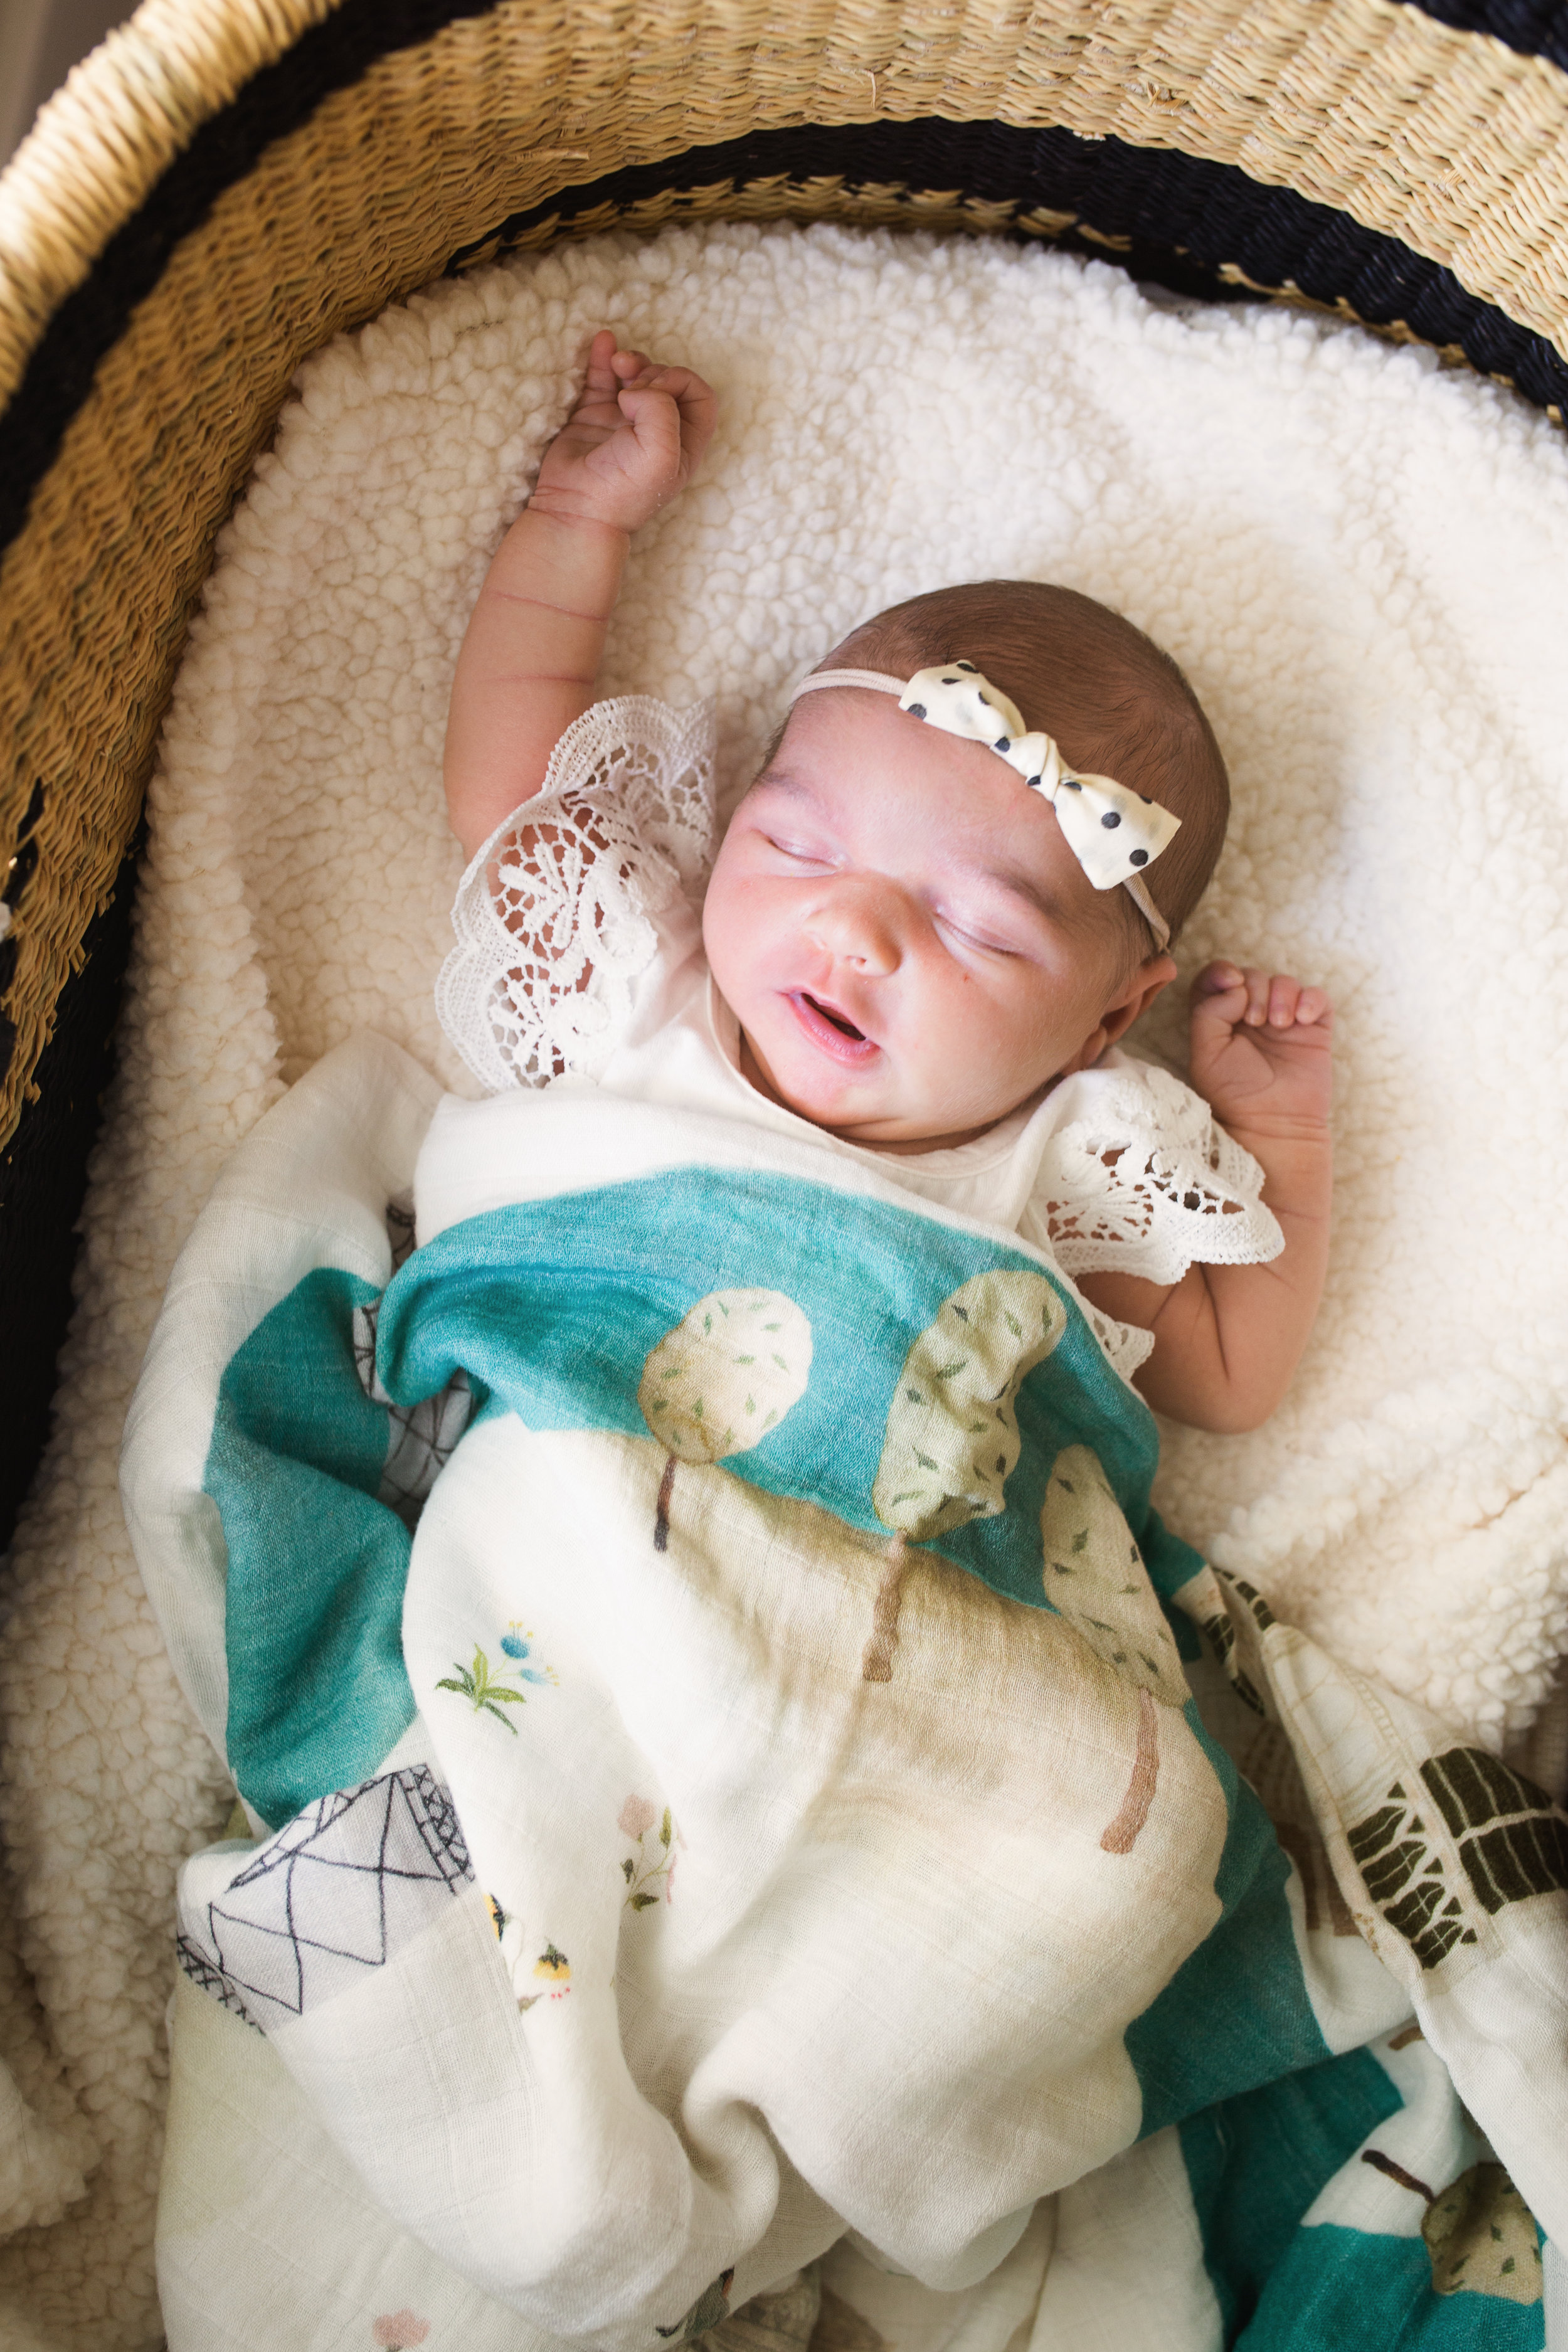 newborn baby girl in bassinet sleeps with one arm above her head